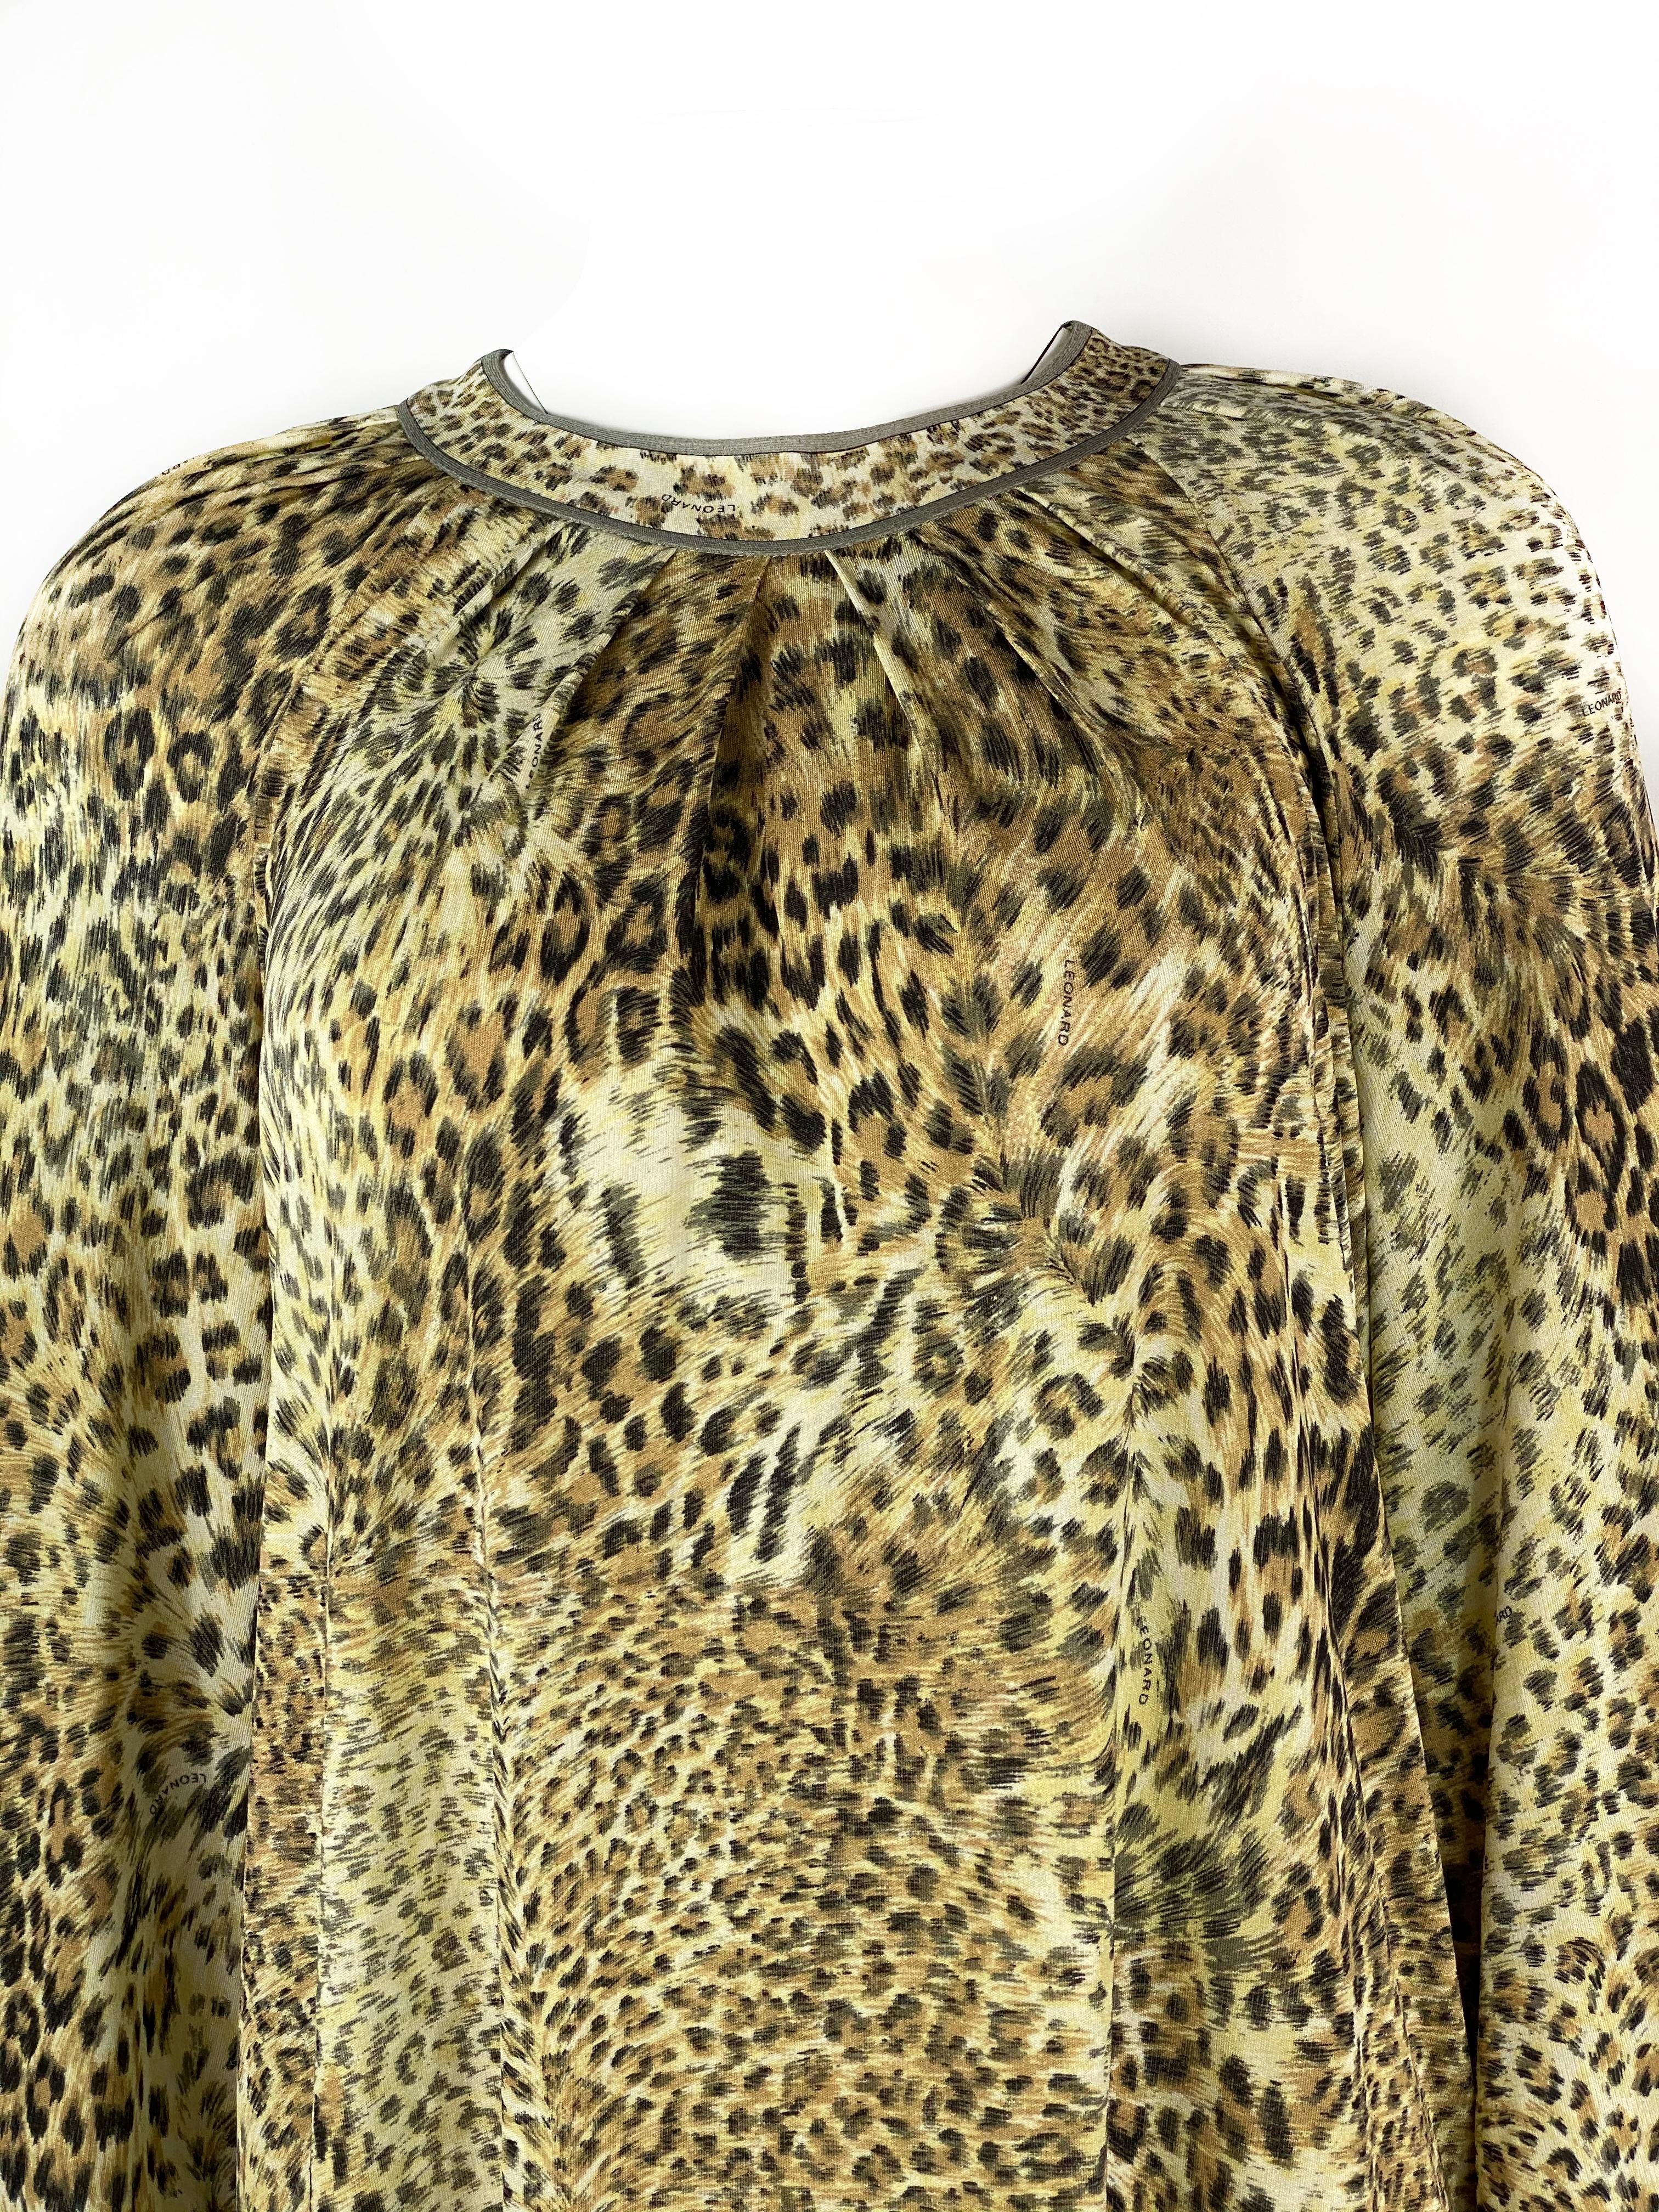 Vintage LEONARD Paris Silk Leopard 3/4 Sleeve Mini Dress Size 42

Product details:
Size 42
Beige/ light brown leopard print with LEONARD 
Rear zip closure
¾ sleeves measure 22” long from the shoulder
Made in Italy
